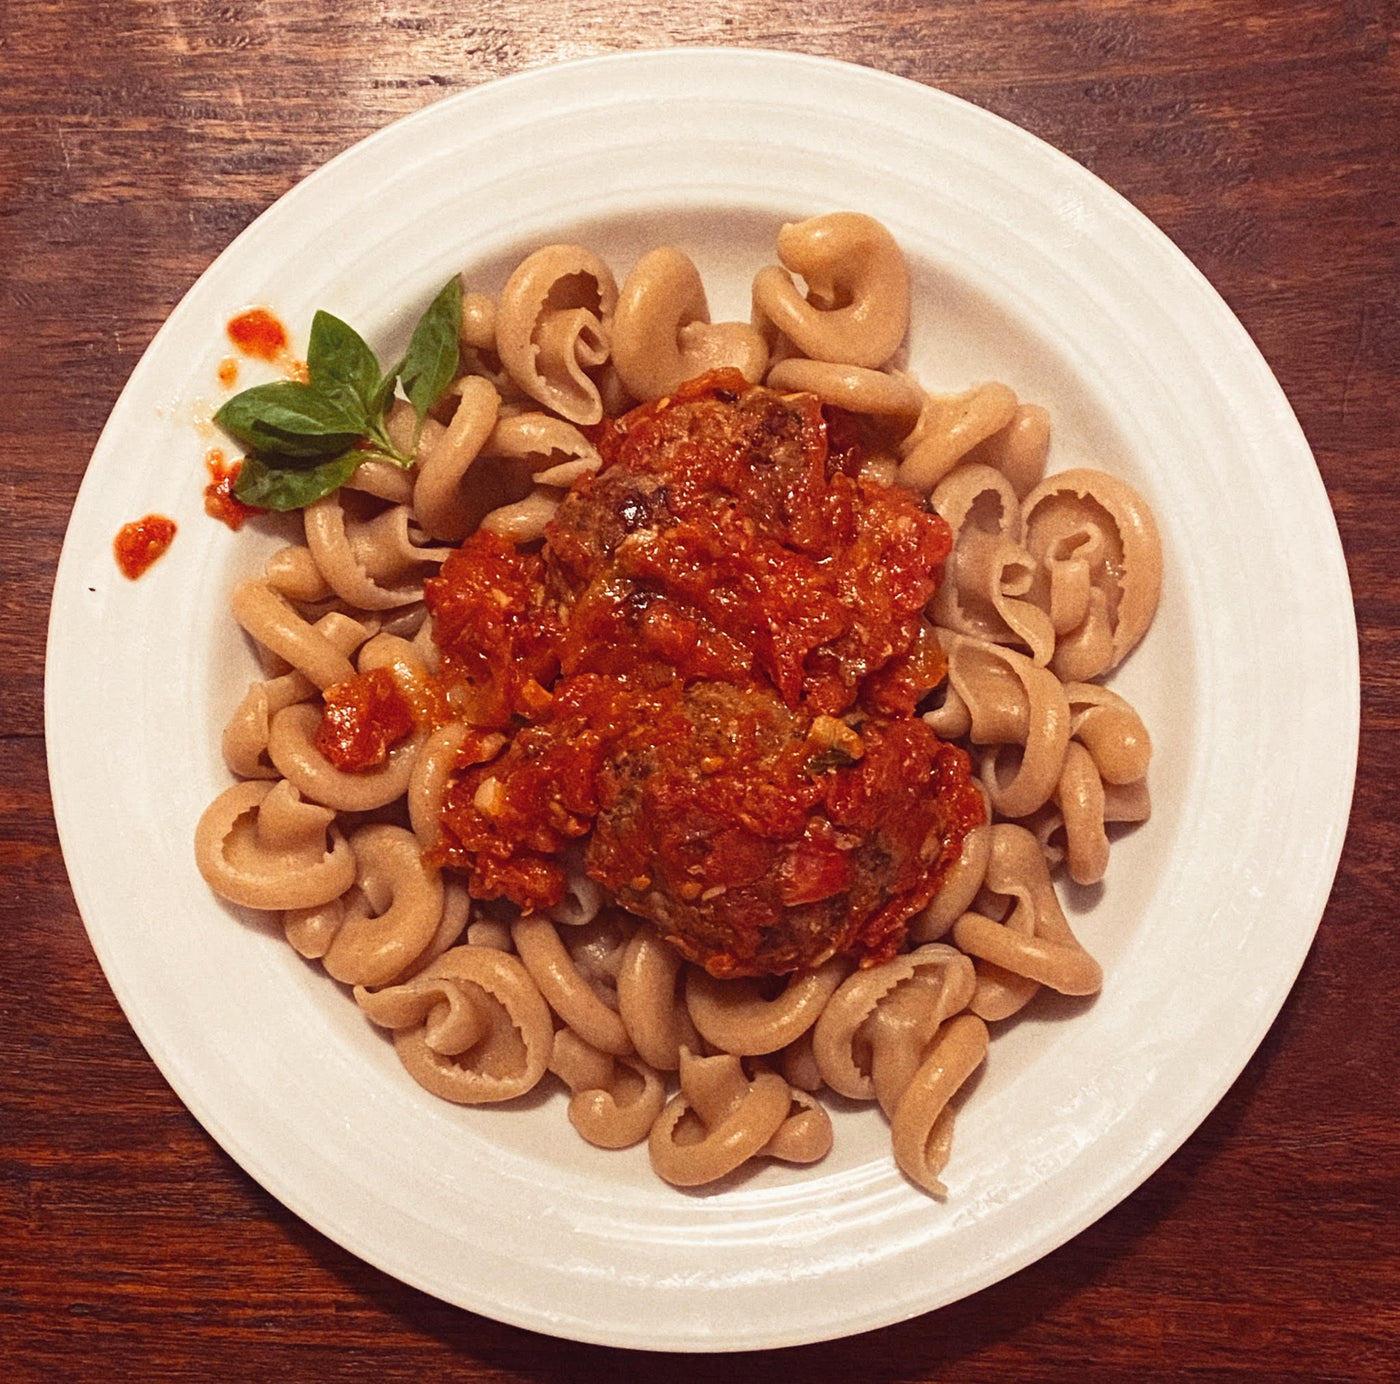 Image of Foggy Mountain Pasta's dried Girelle Pasta prepared with a red sauce and meatballs from the Organic Butcher of McLean.